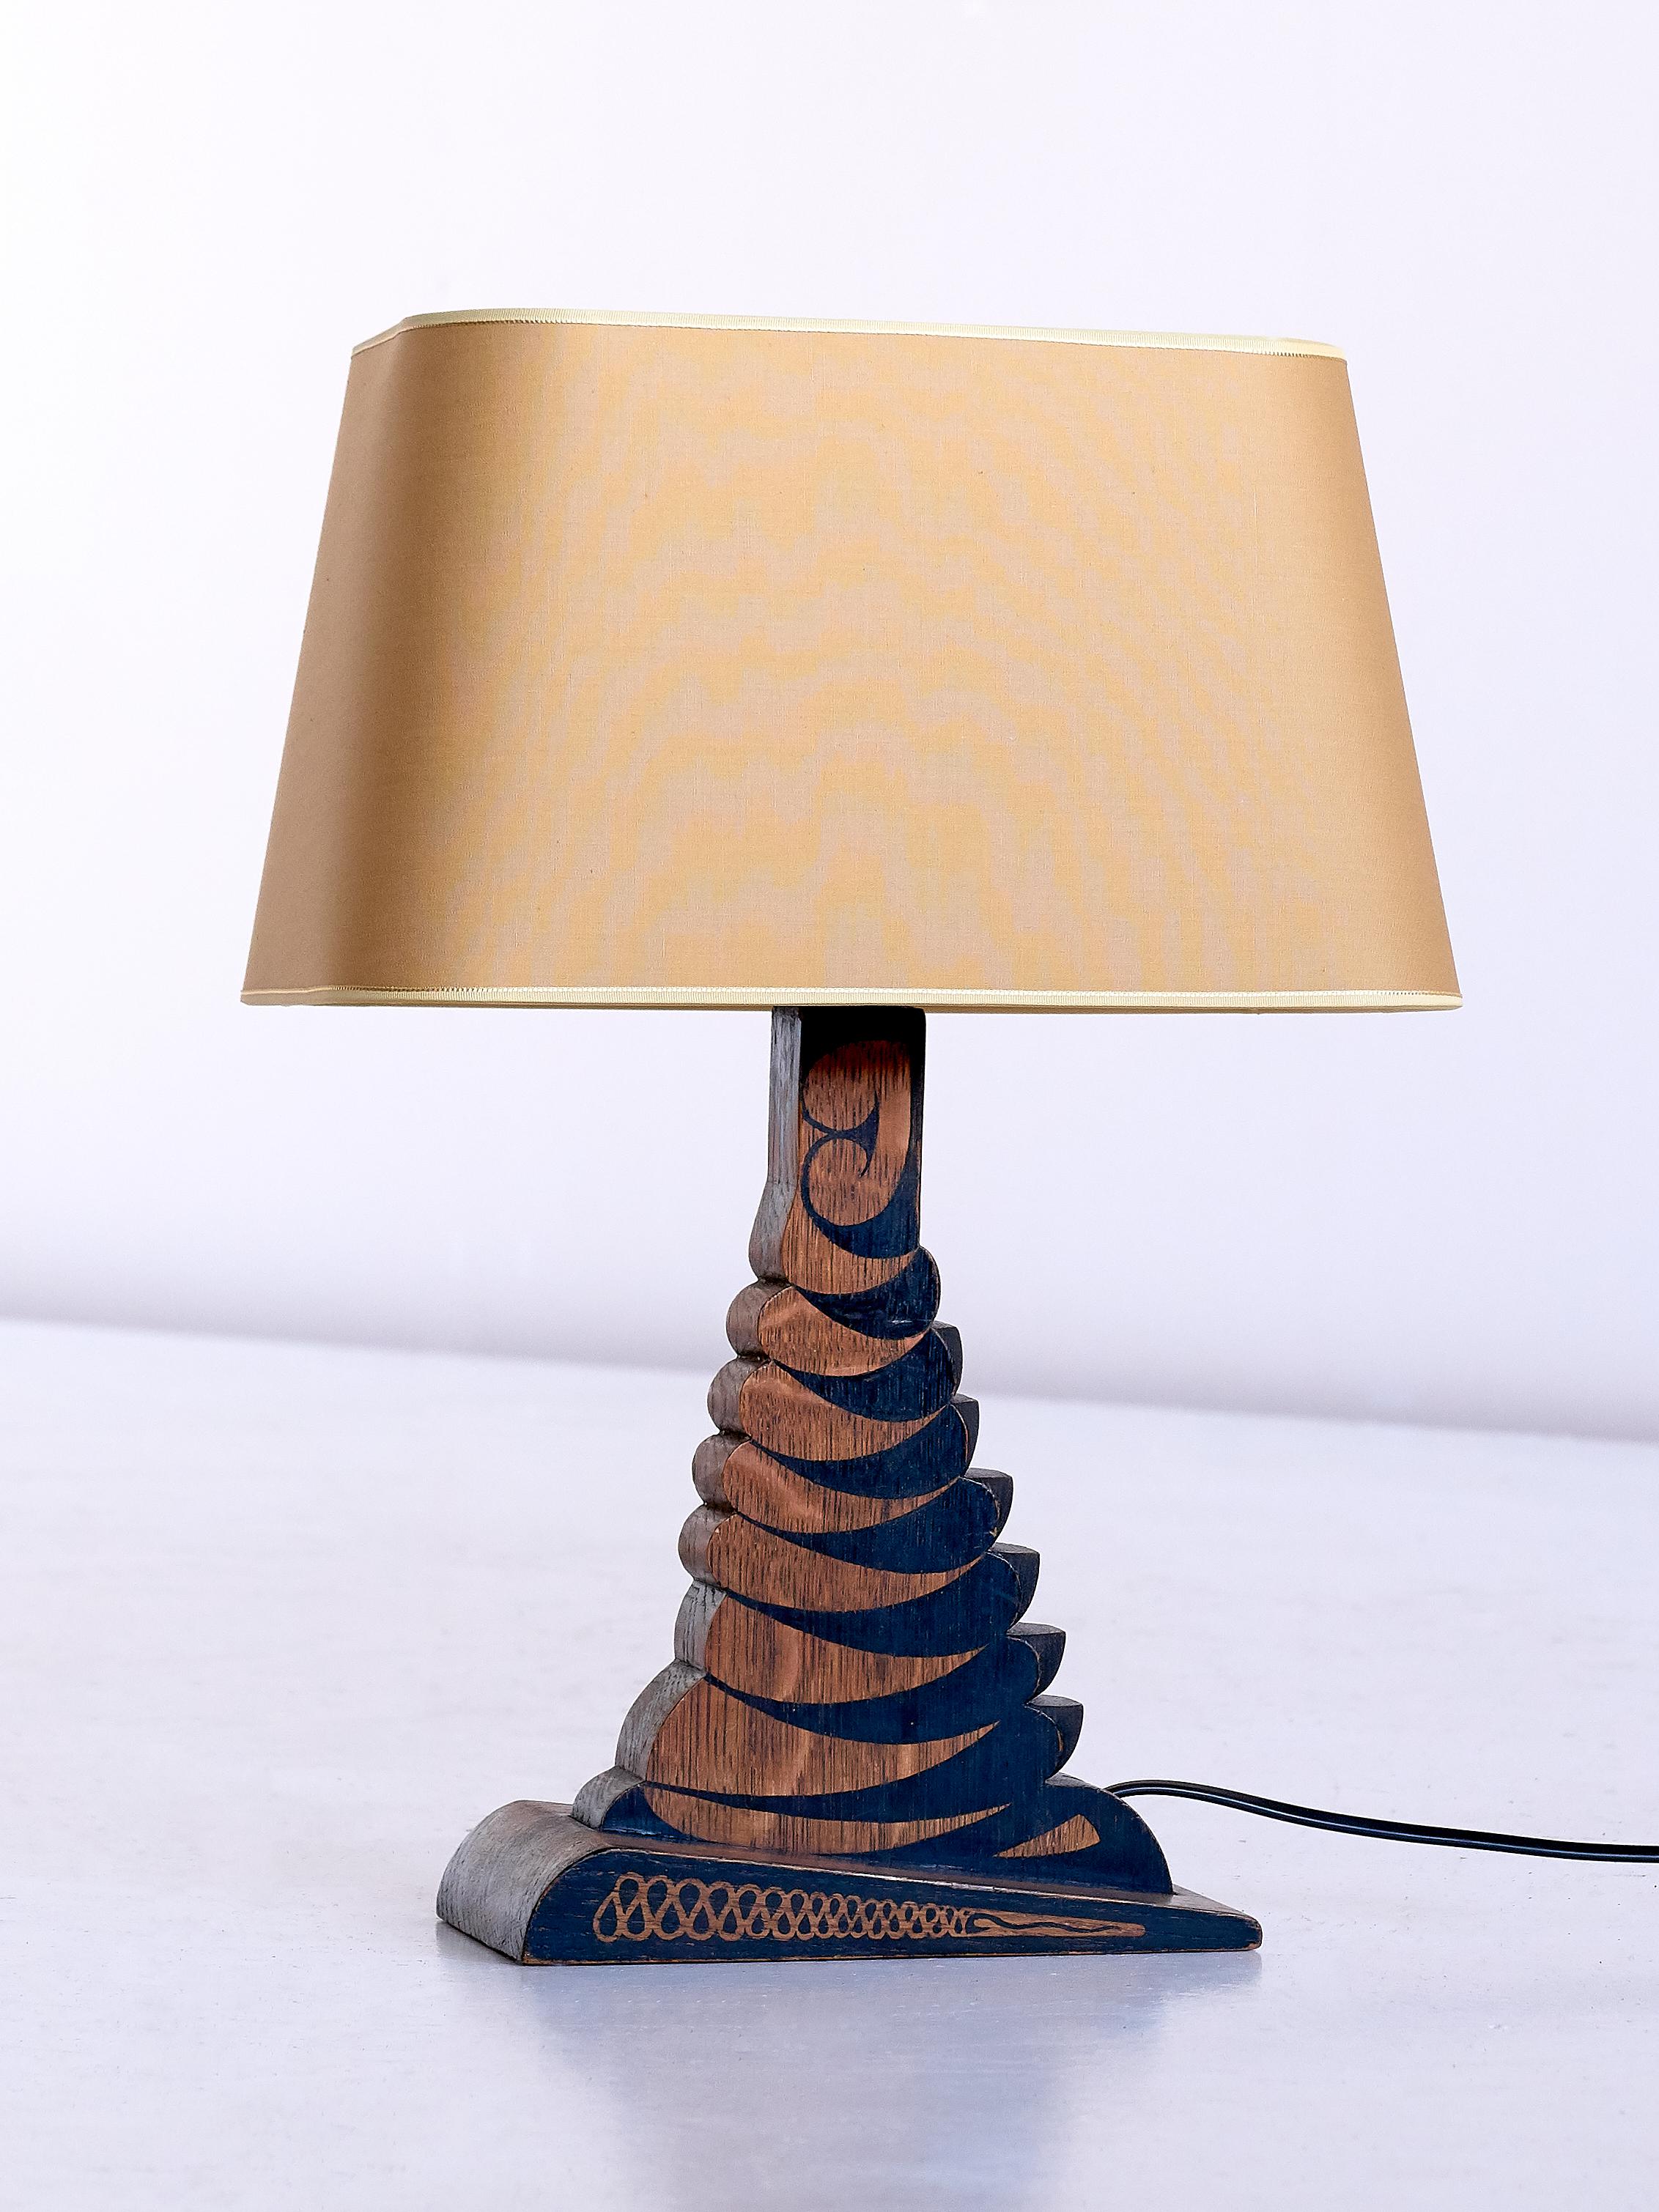 Fabric Louis Bogtman Batiked Oak Table Lamp with Yellow Gold Shade, Netherlands, 1925